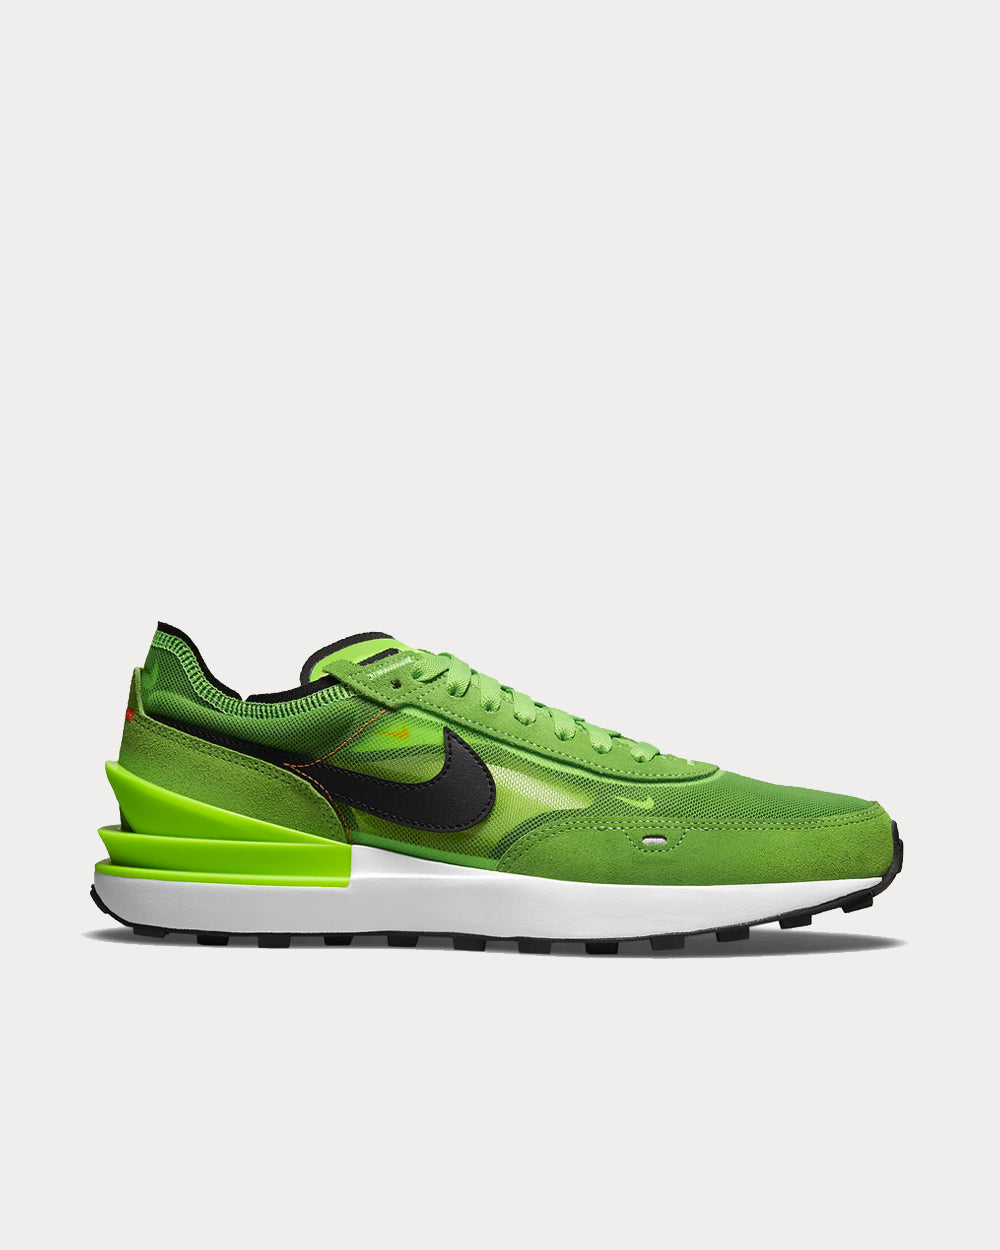 Nike - Waffle One Electric Green / Mean Green / Hyper Crimson / Black Low Top Sneakers